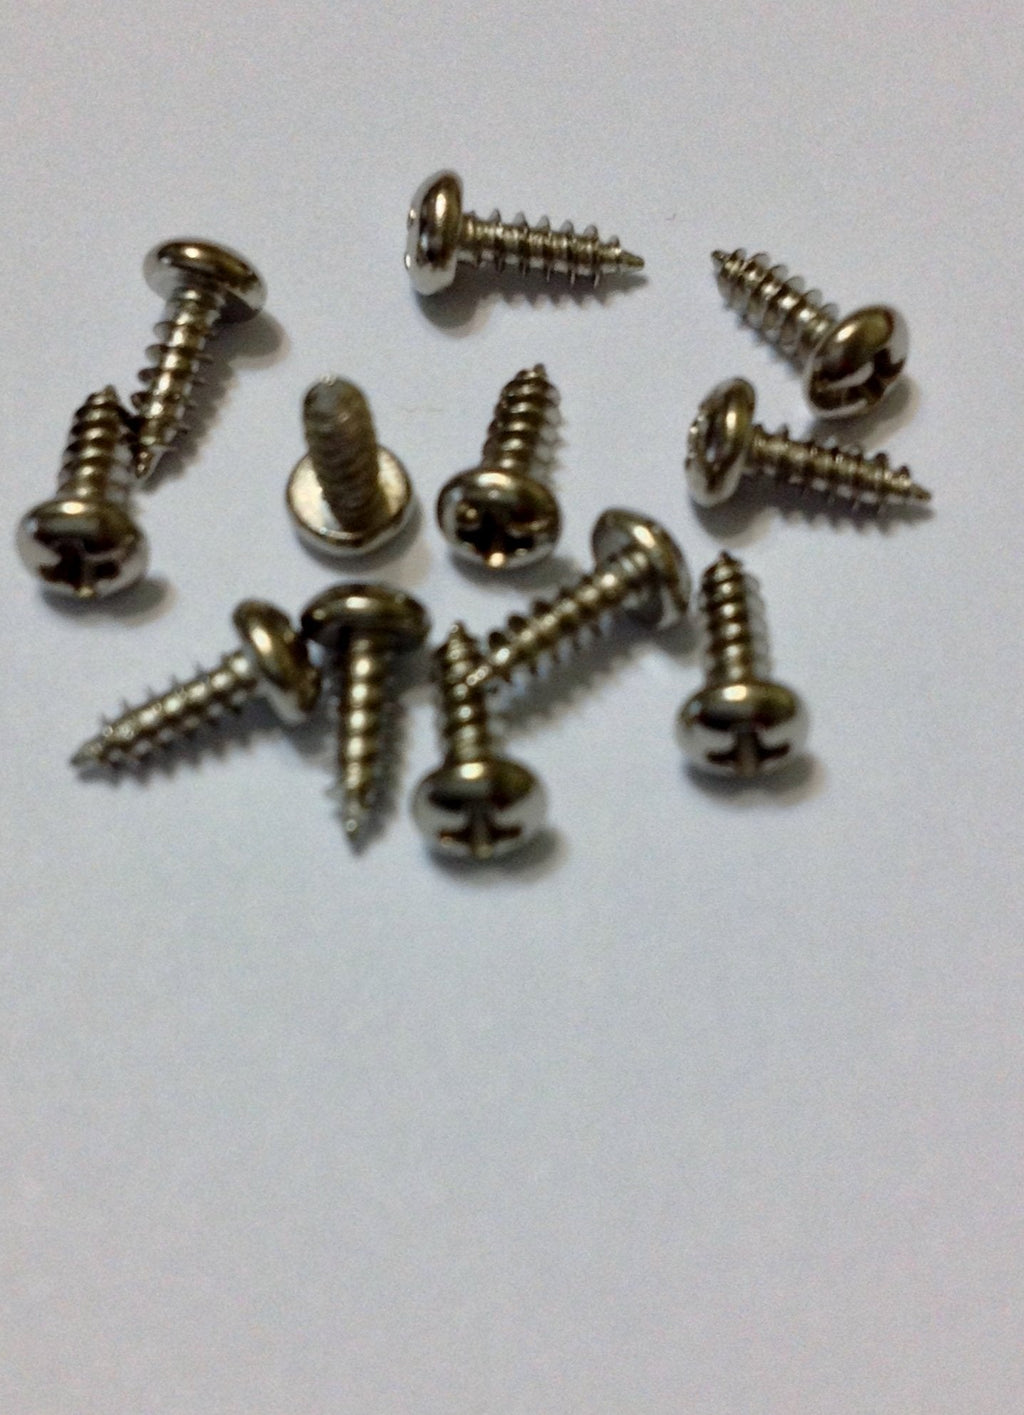 12 Pack #2 x 1/4 inch Small Phillips Guitar Truss Rod Cover Screws Nickel